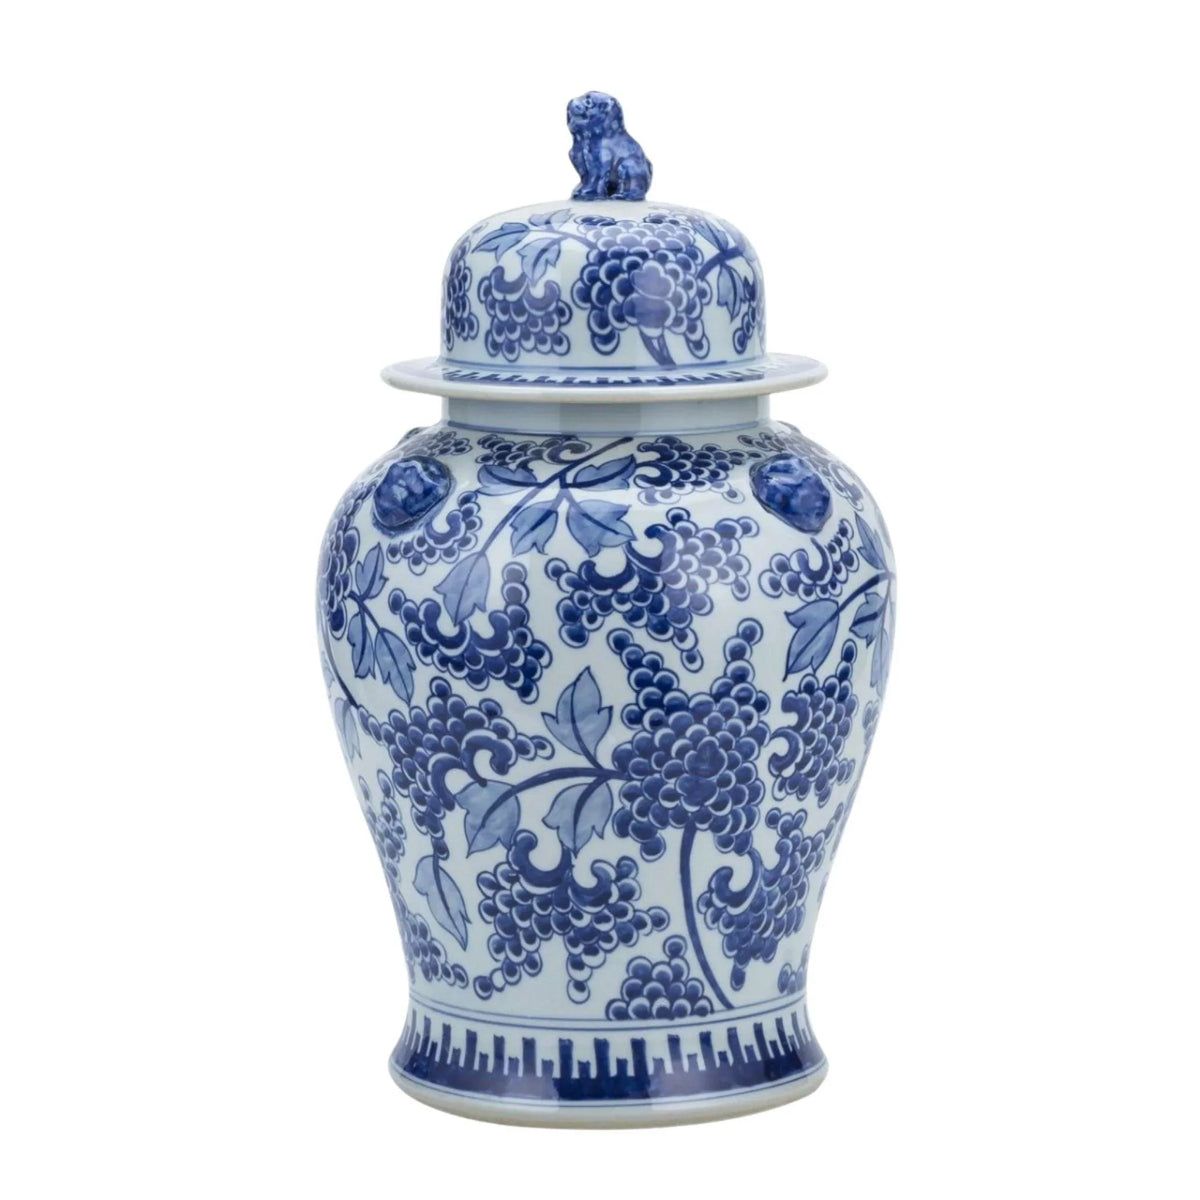 Blue And White Porcelain Peony Temple Ginger Jar With Lion Handles | The Well Appointed House, LLC